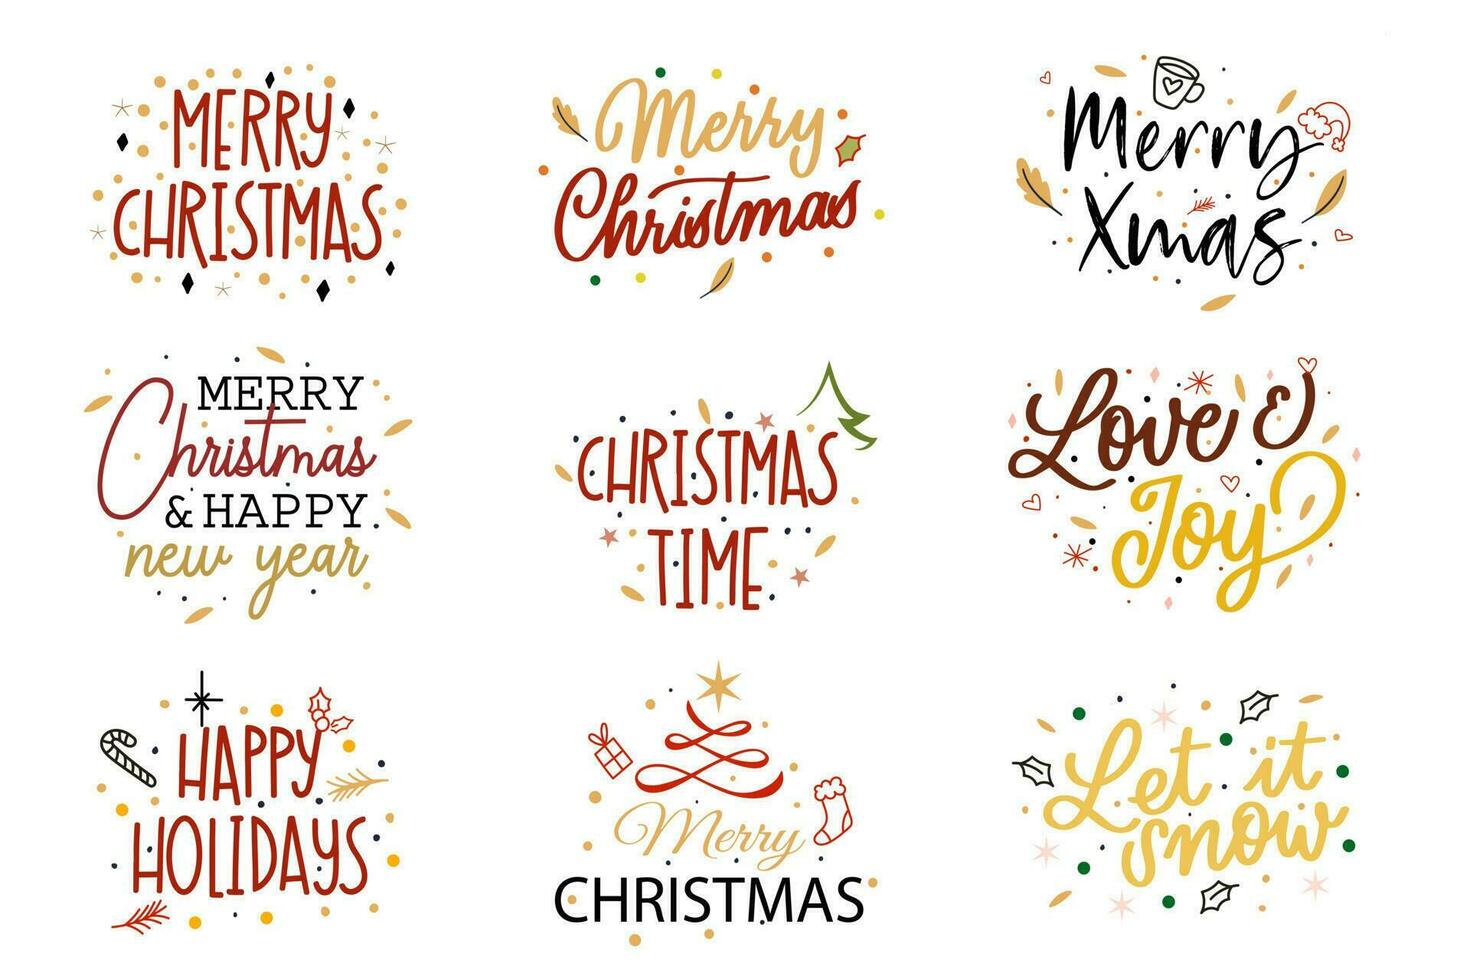 Merry Christmas Wishes Lettering Badges. Christmas and Happy New Year Typography Set Flat Vector